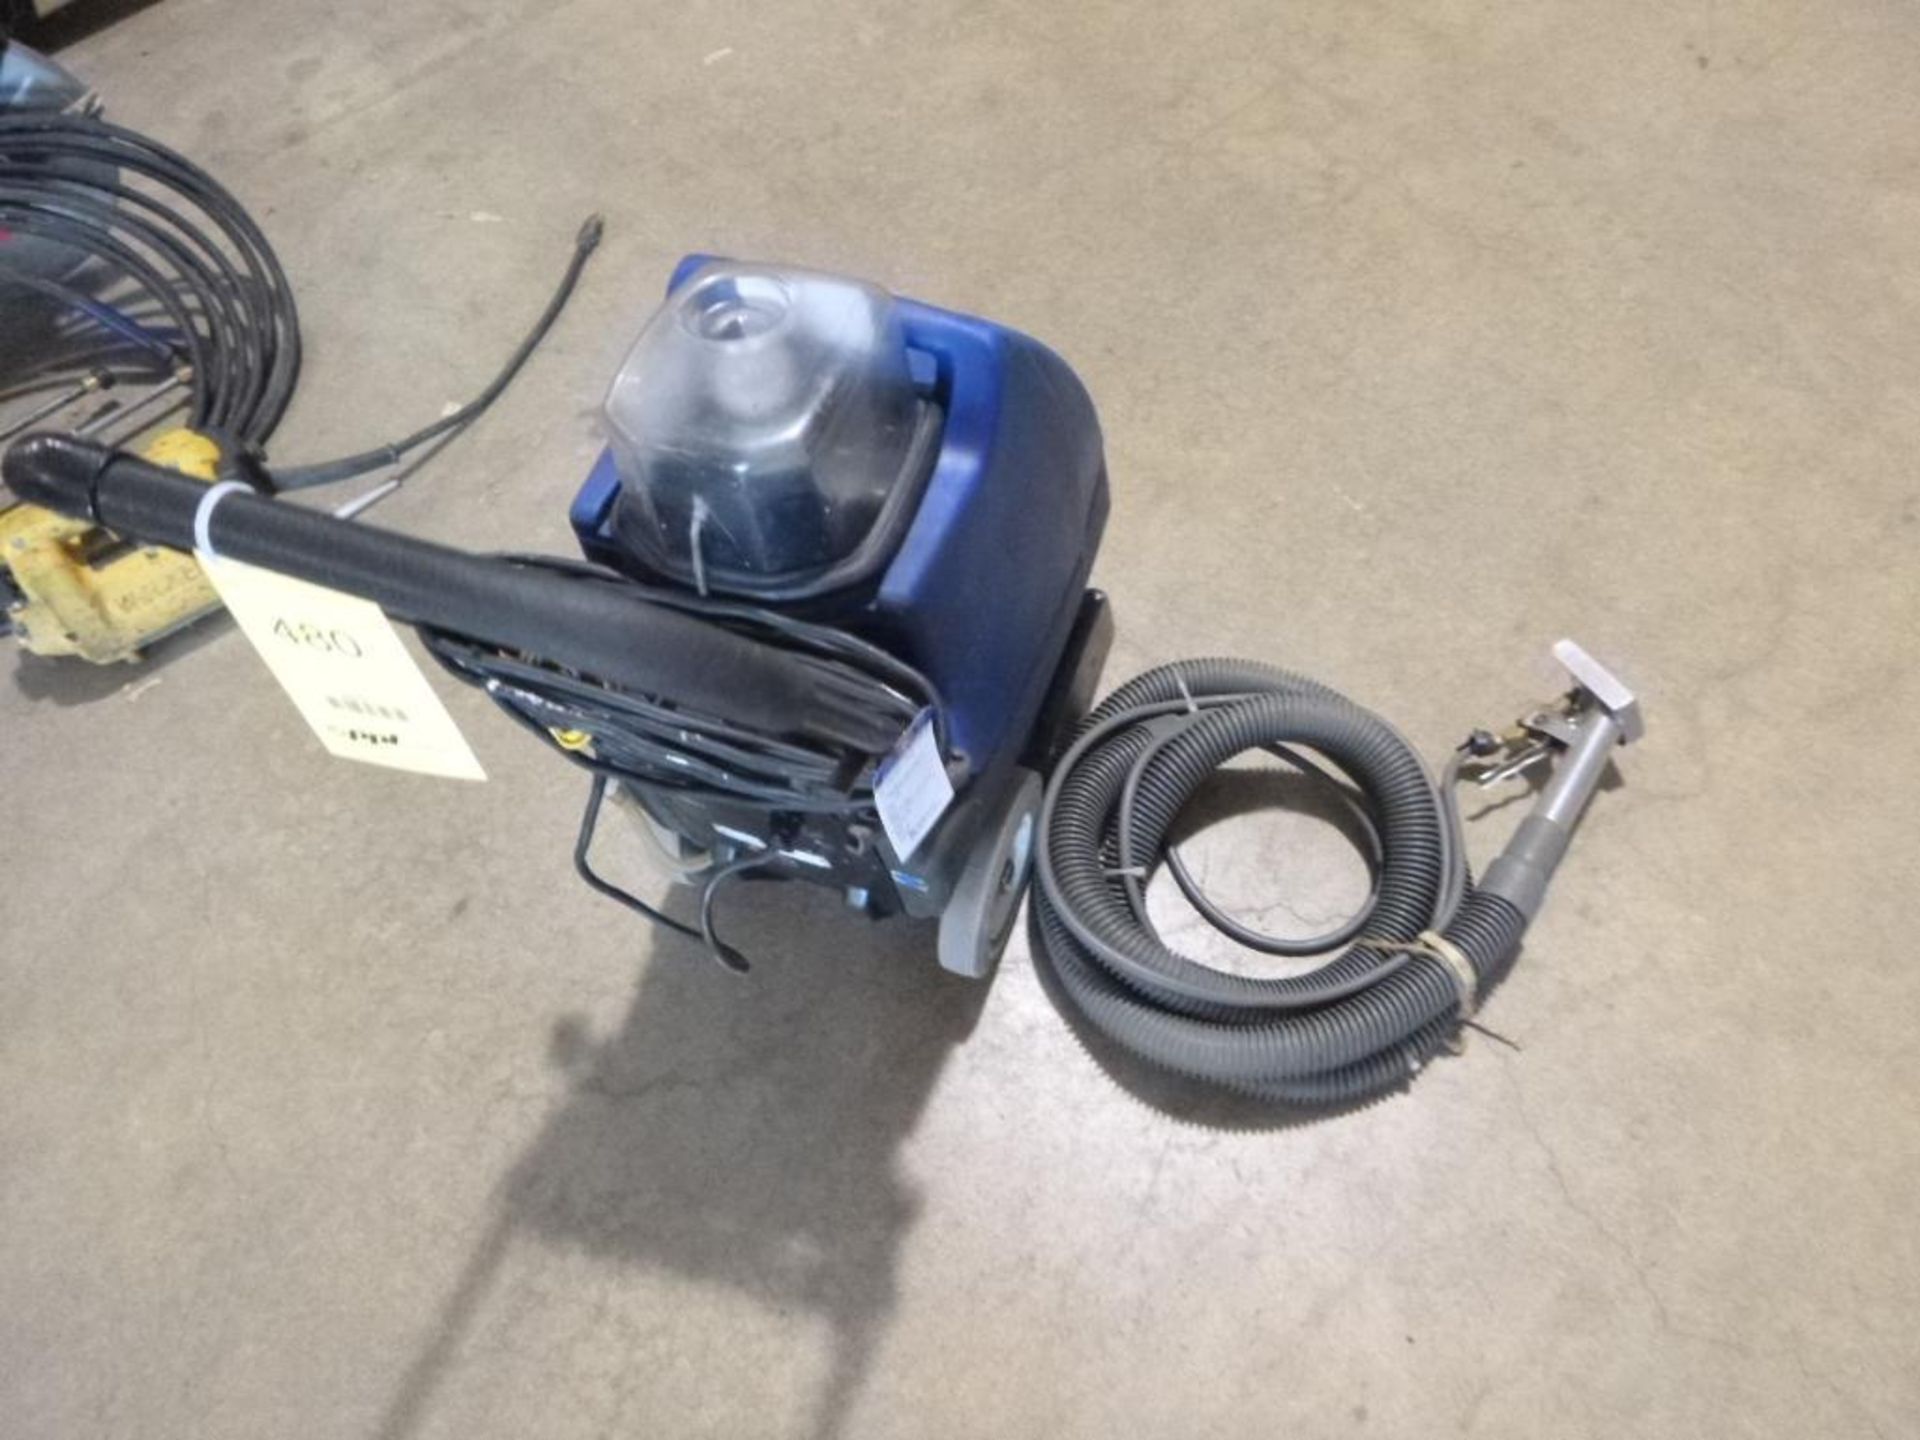 Carpet Steam Cleaner with Upholstery Tool - Image 3 of 5